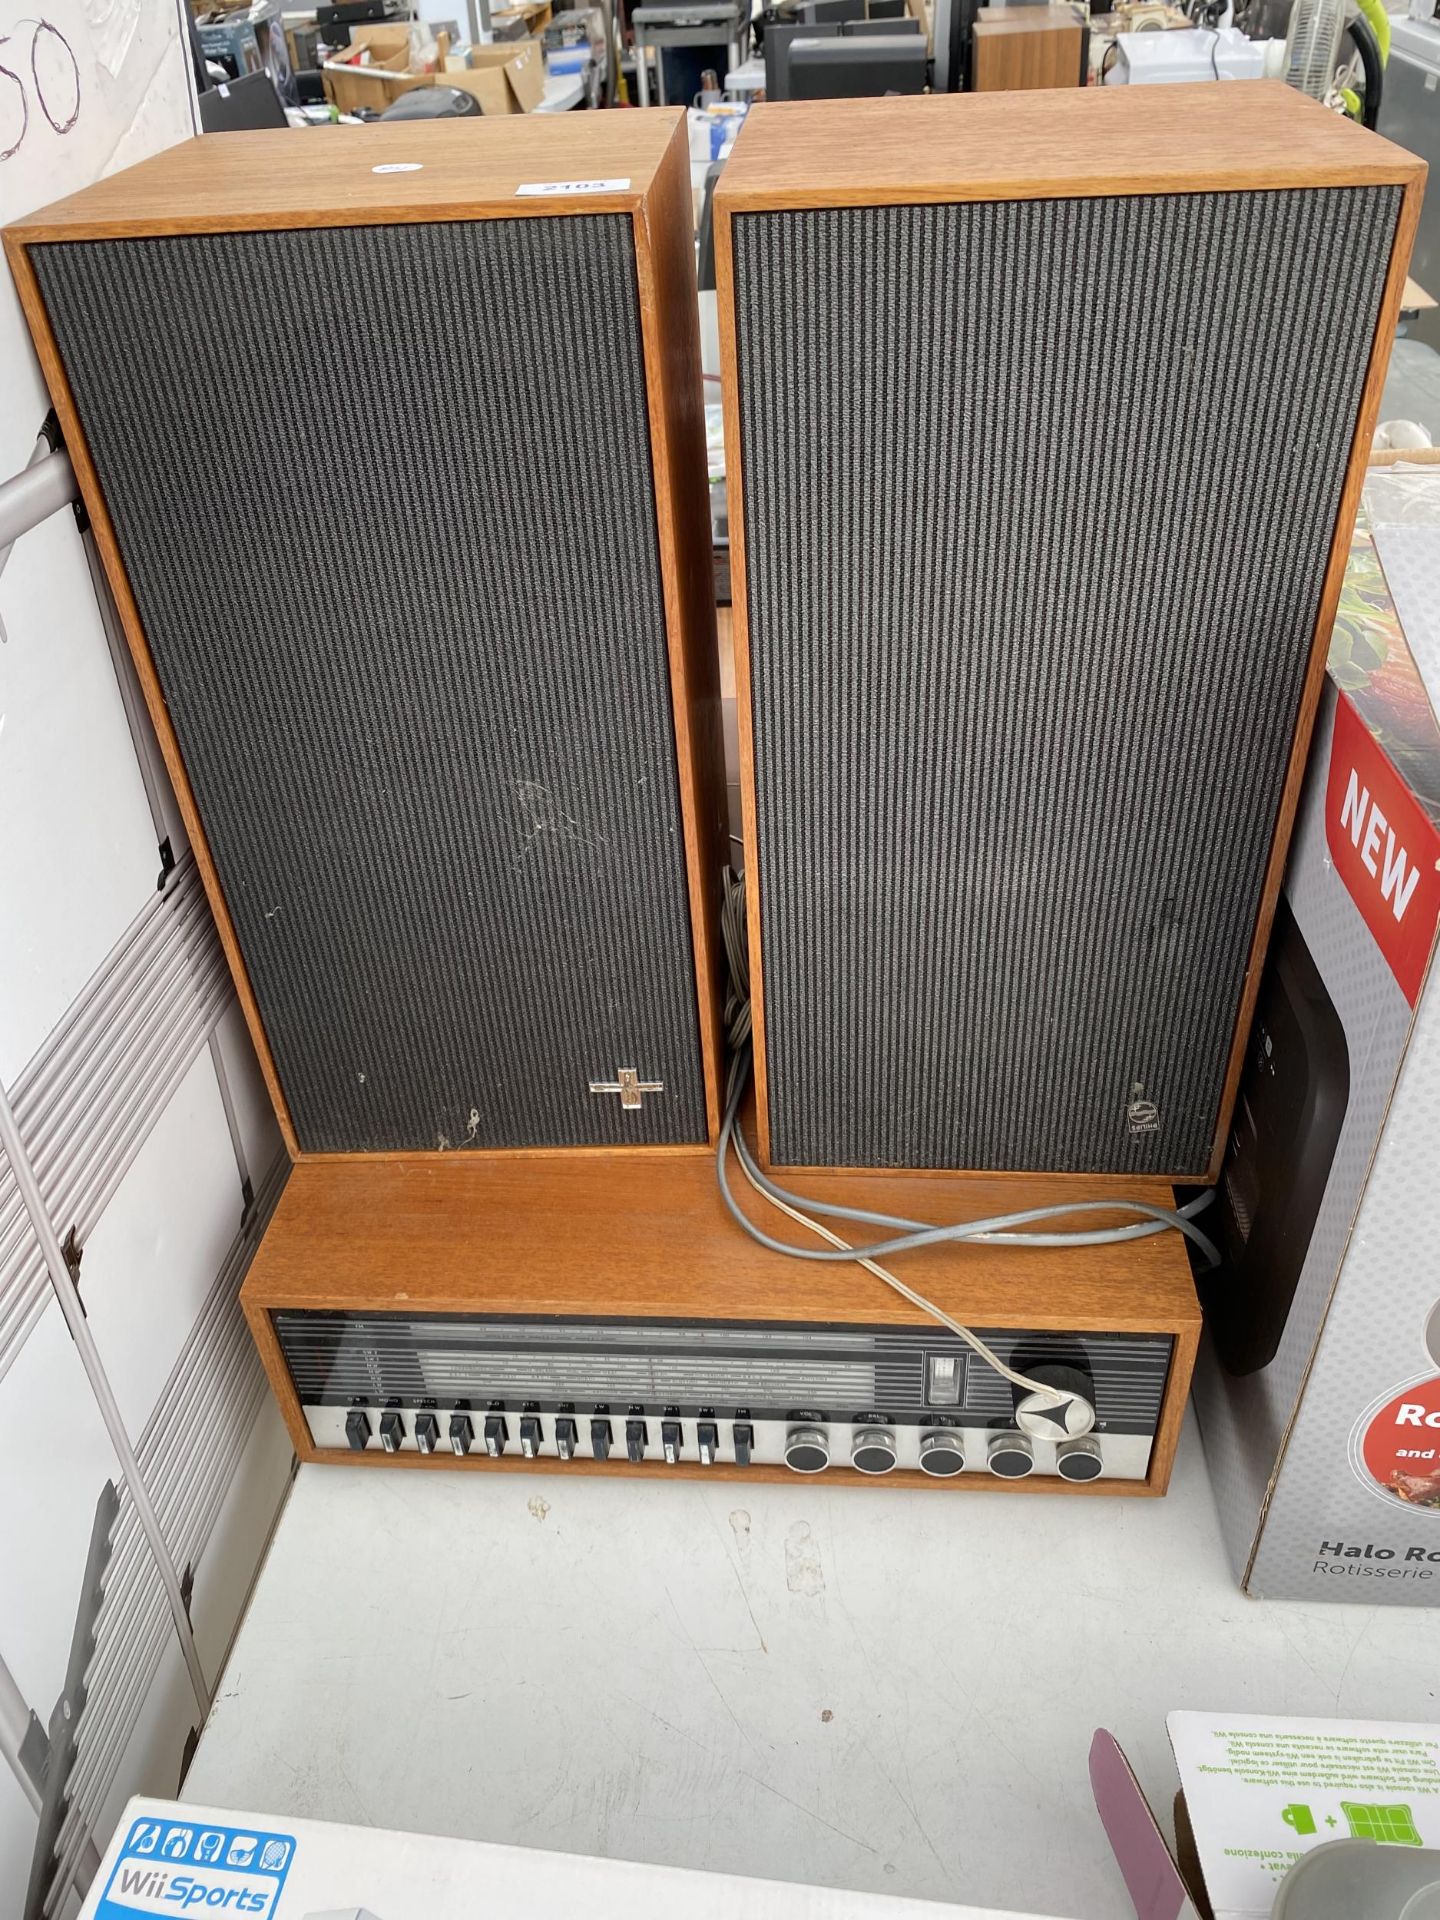 A PHILIPS VINTAGE RADIO AND A PAIR OF SPEAKERS